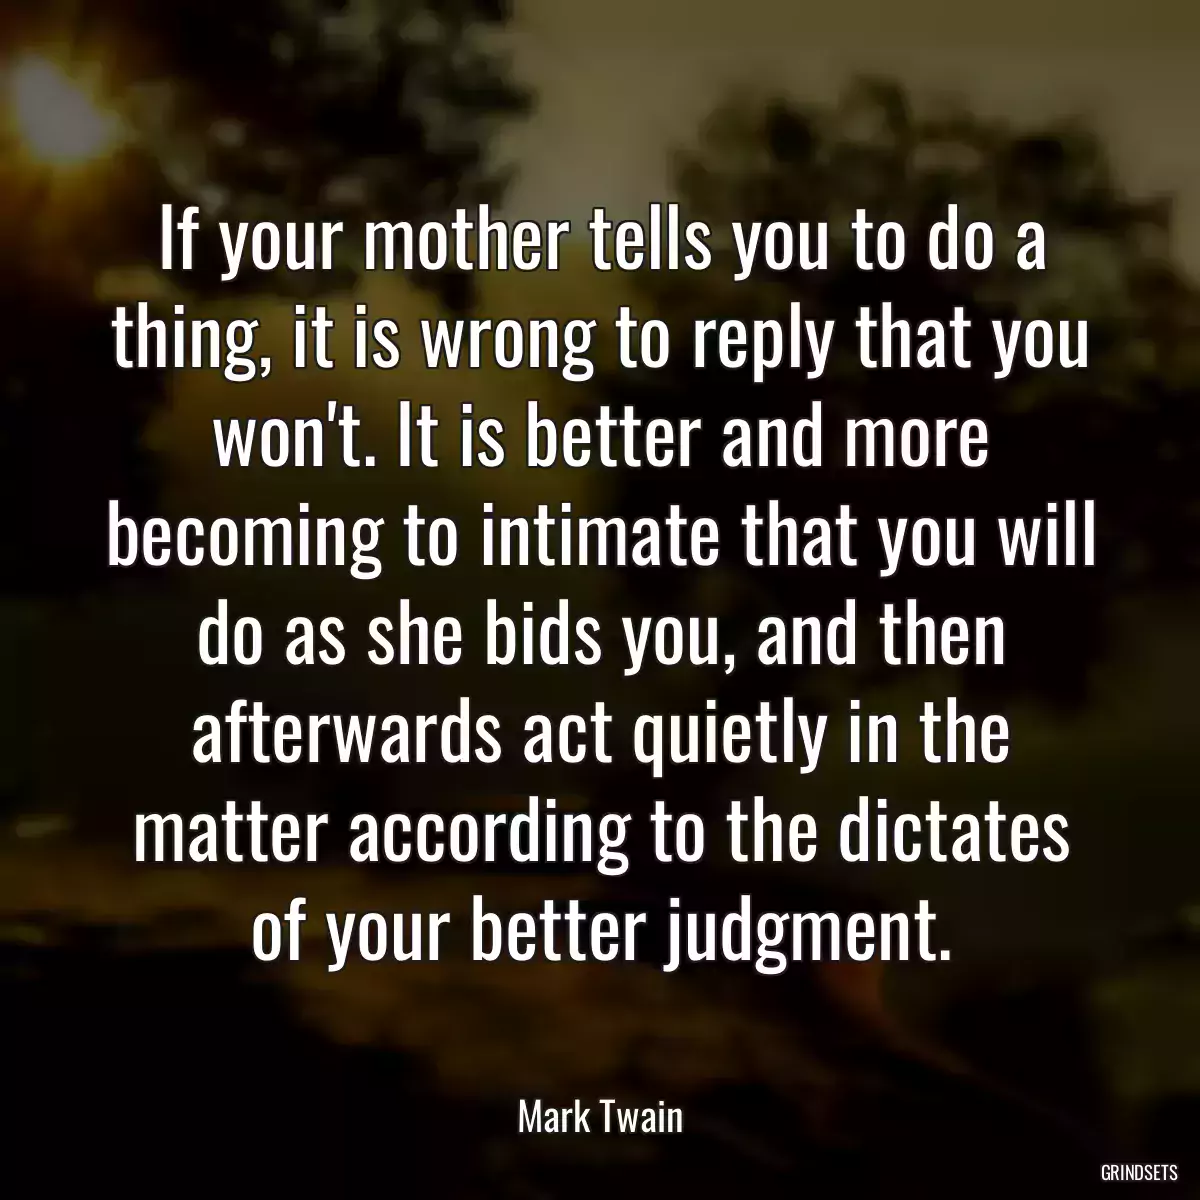 If your mother tells you to do a thing, it is wrong to reply that you won\'t. It is better and more becoming to intimate that you will do as she bids you, and then afterwards act quietly in the matter according to the dictates of your better judgment.